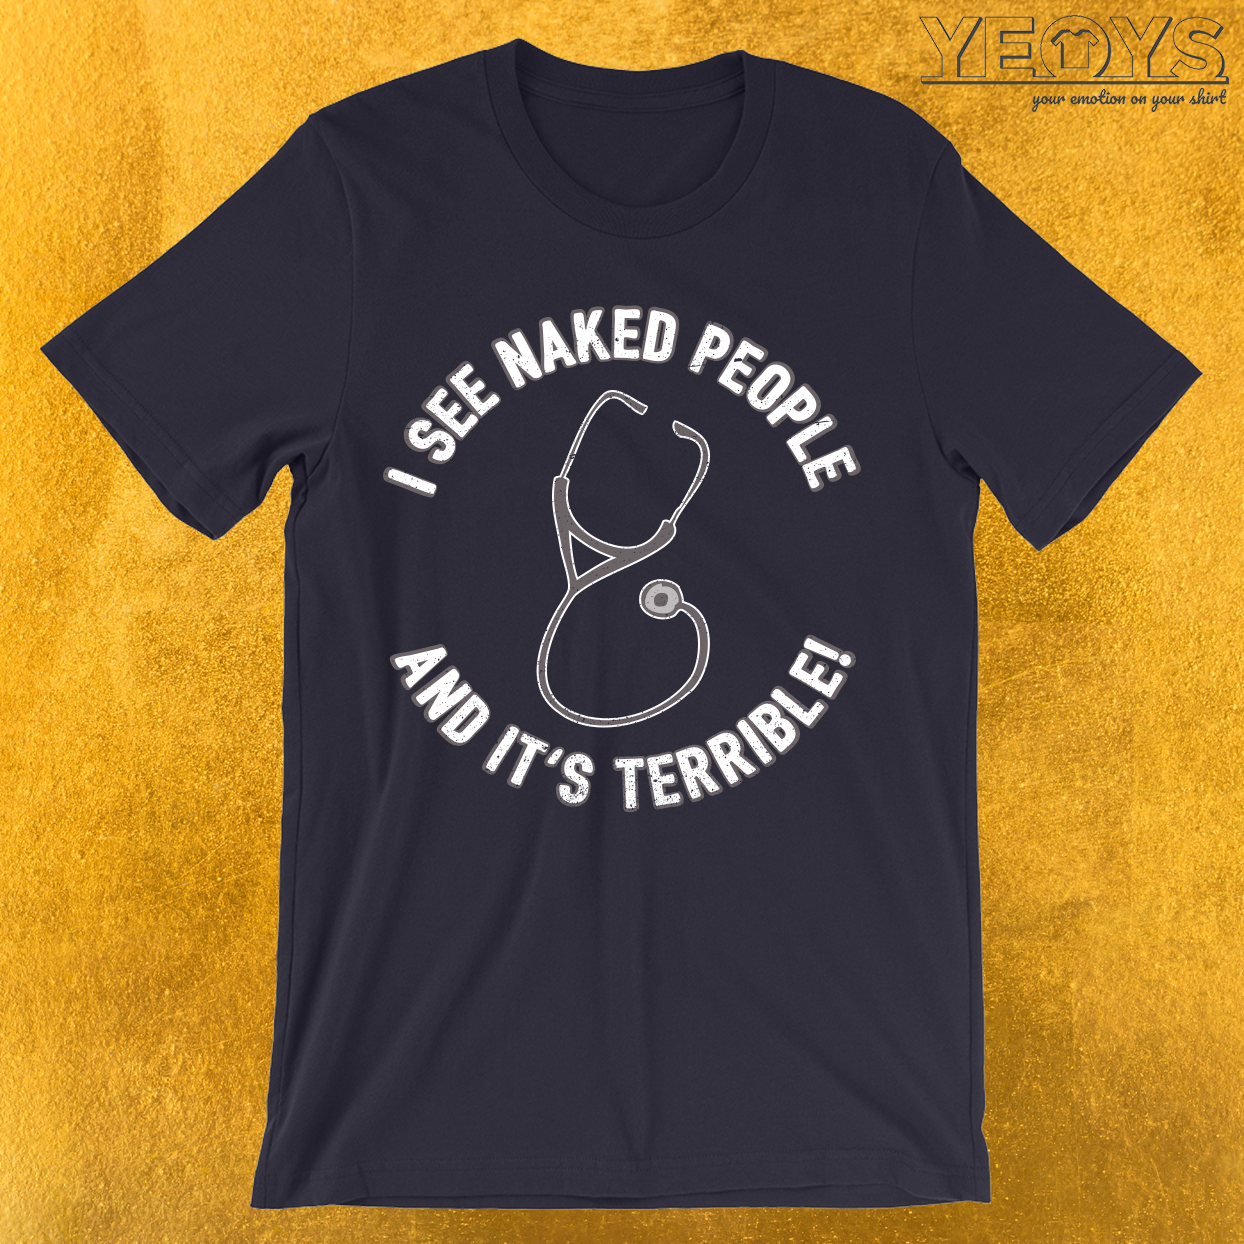 I See Naked People And It’s Terrible T-Shirt